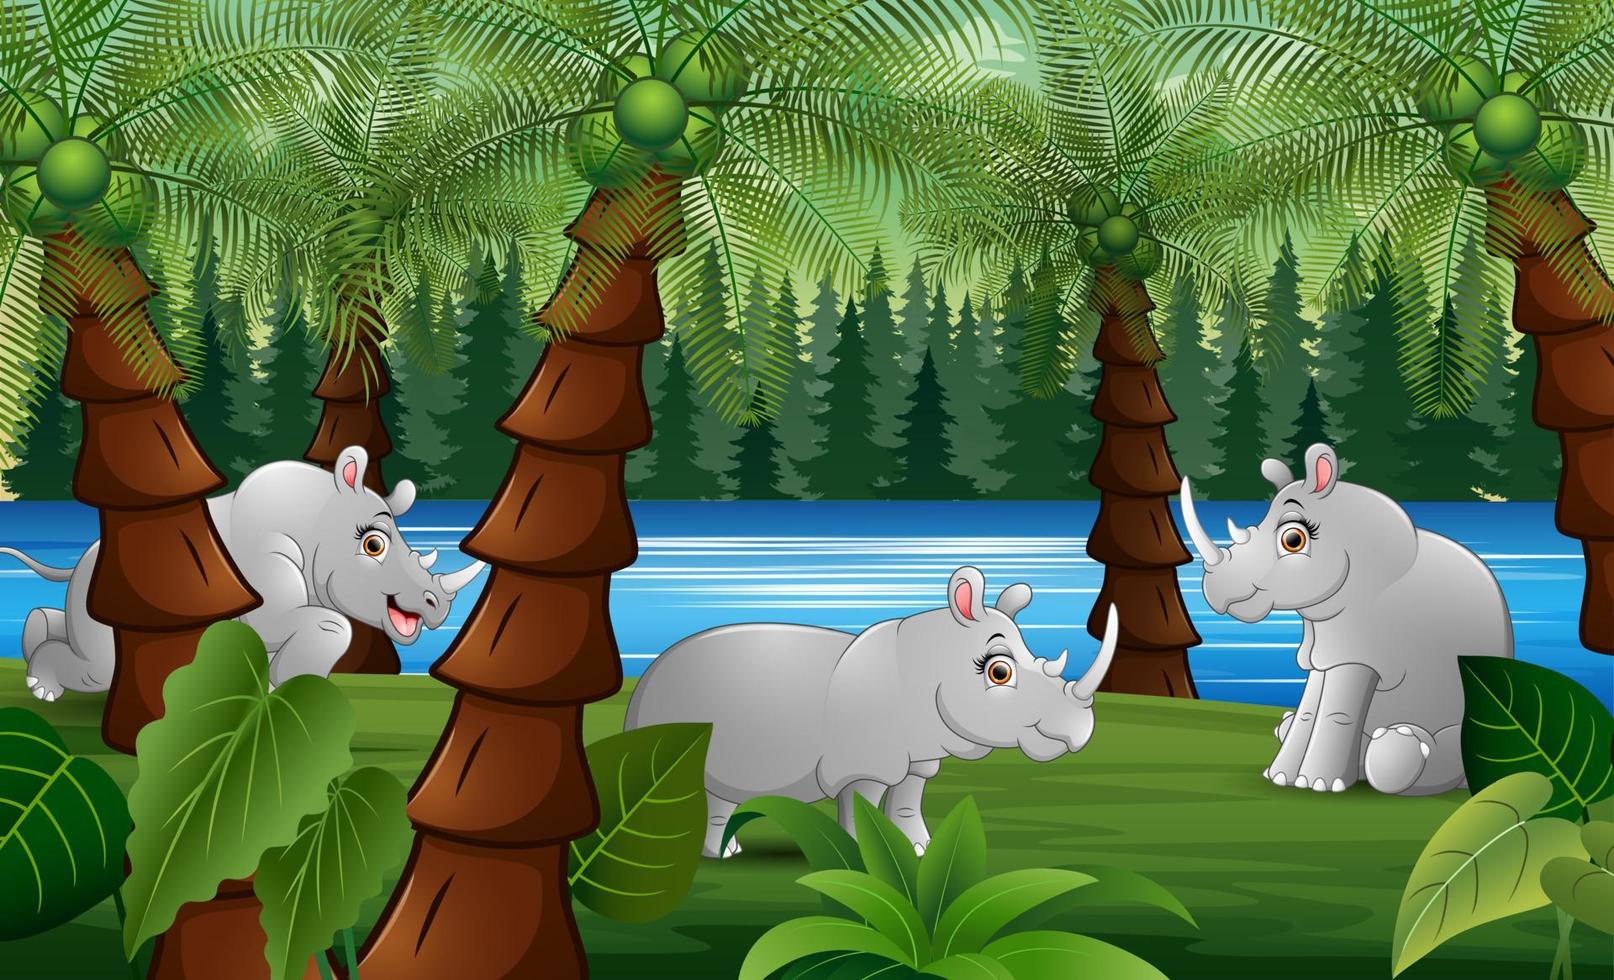 Cartoon of rhinos are playing in a palm jungle vector